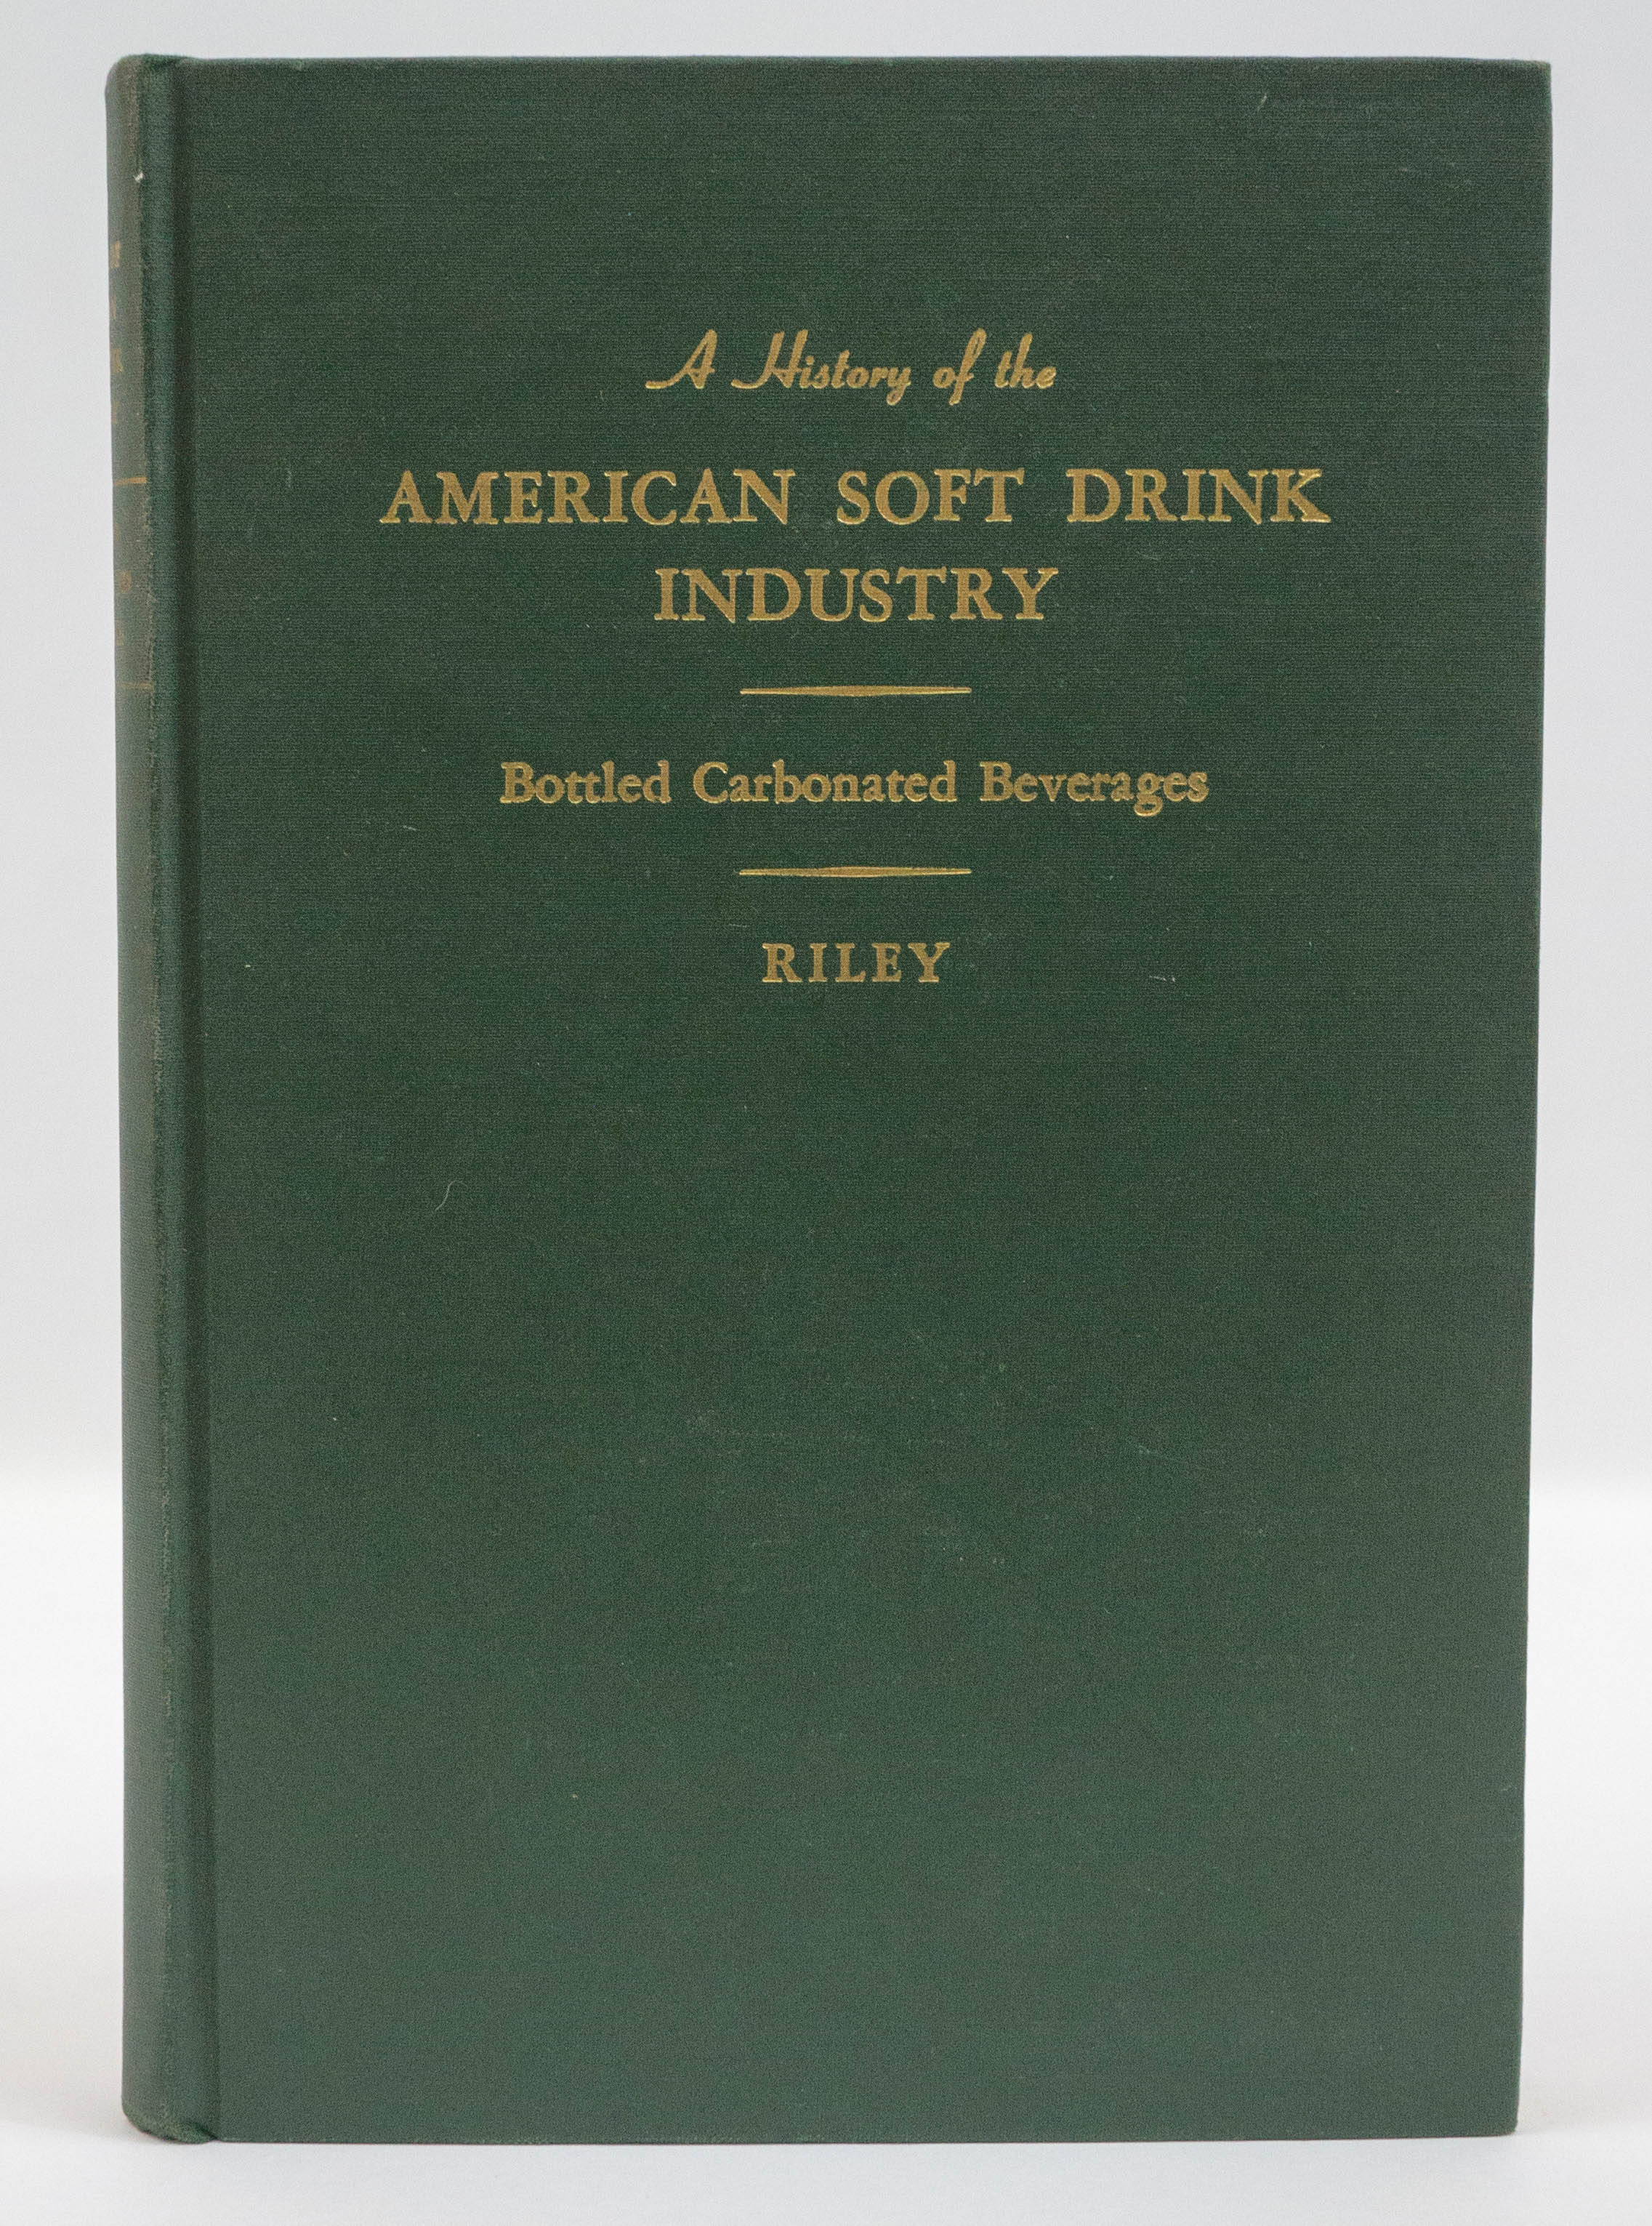 A History of the American Soft Drink Industry 1958